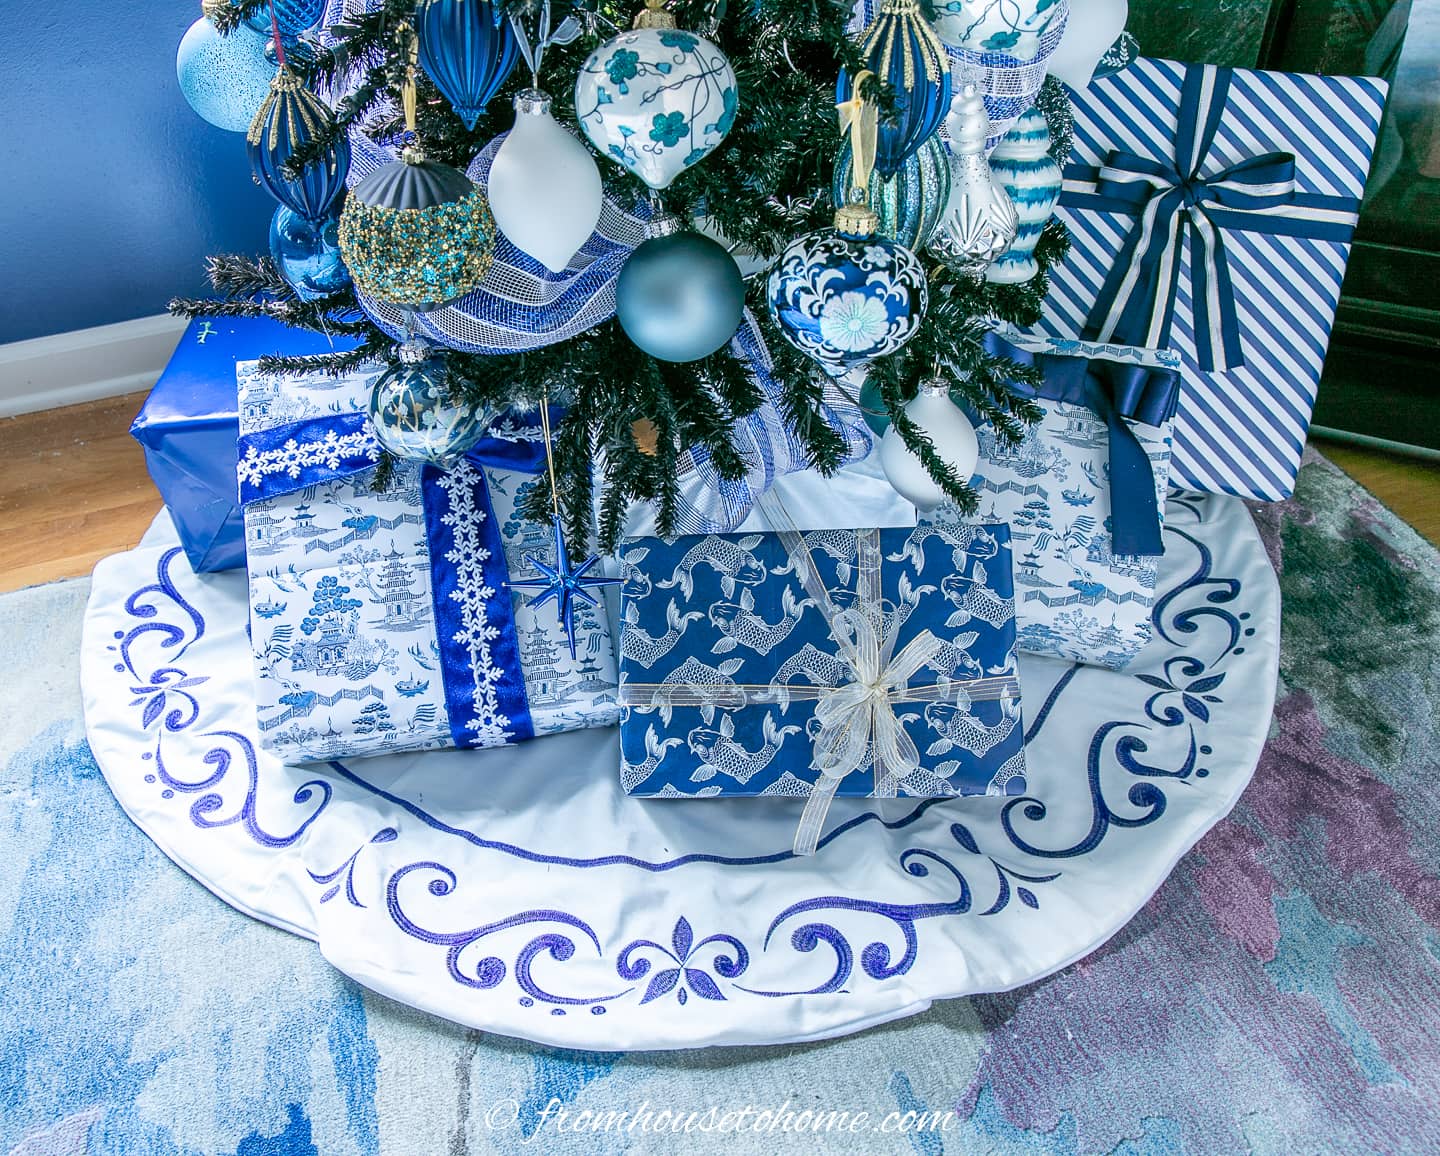 Presents wrapped in blue and white Chinoiserie wrapping paper